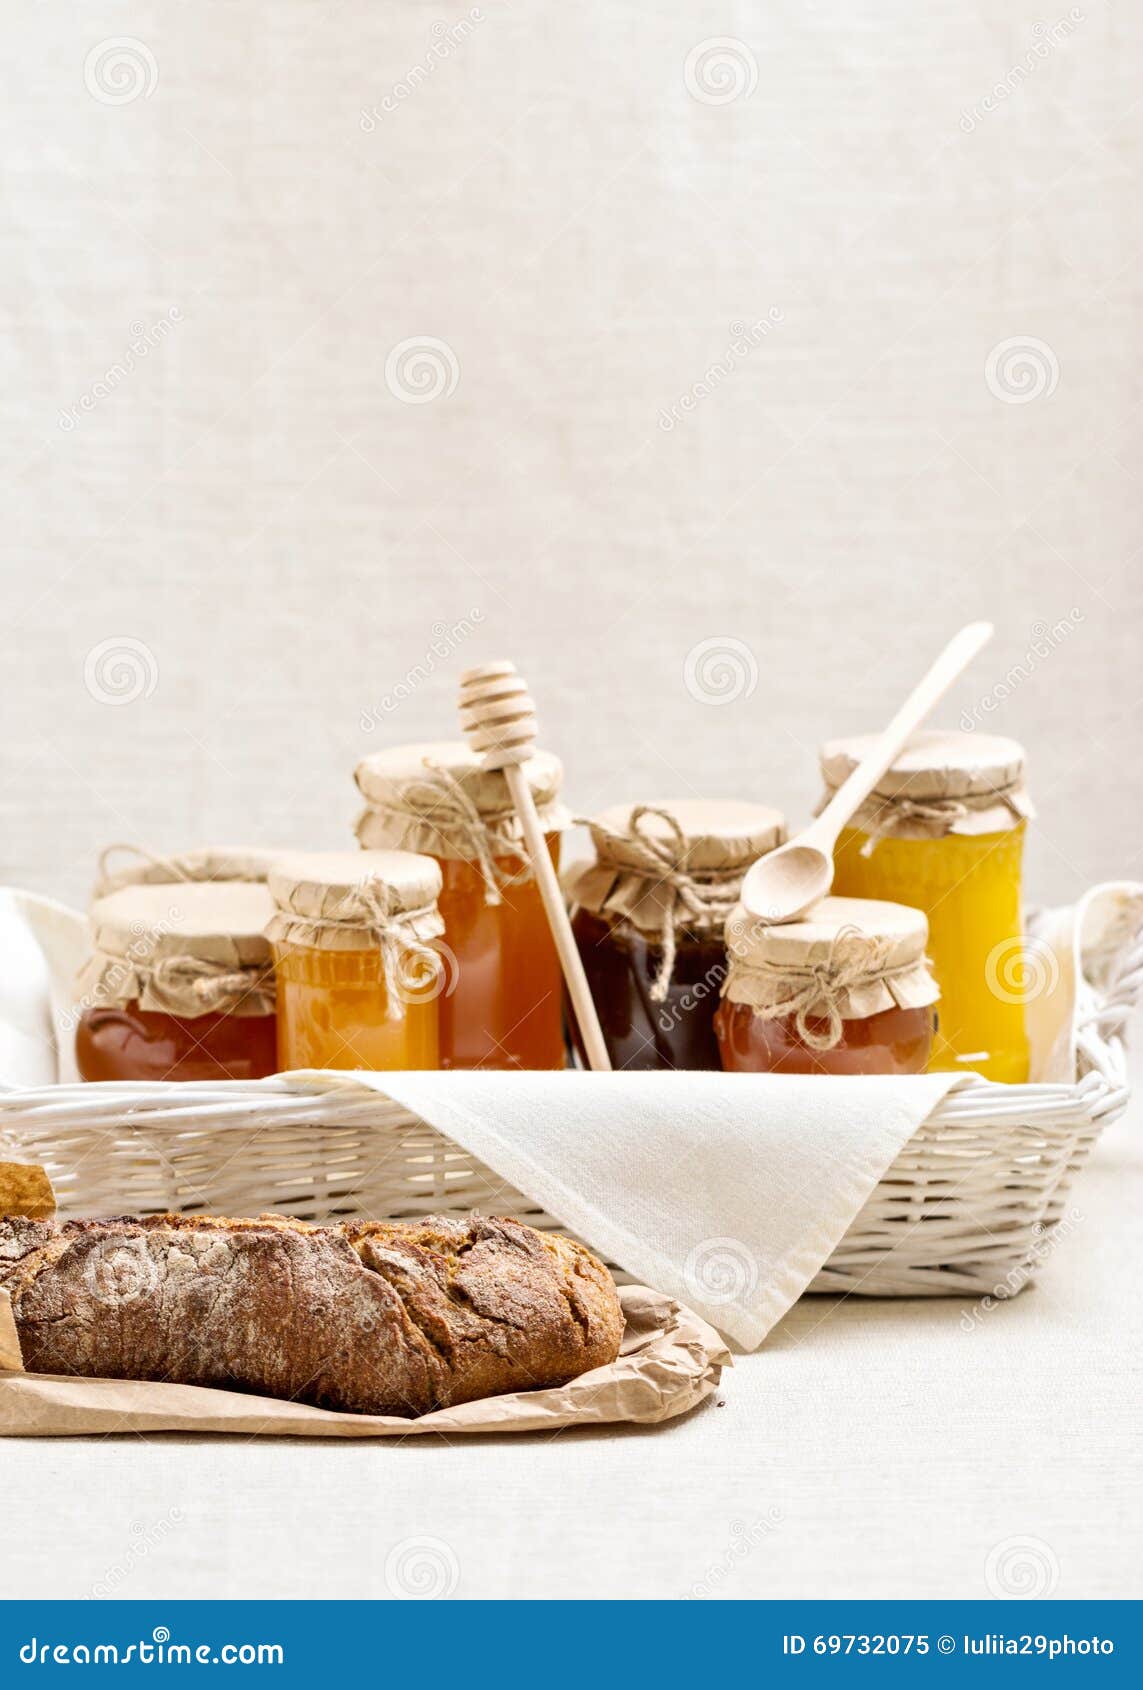 Natural Product. Different Types of Honey and Homemade Bread Stock ...